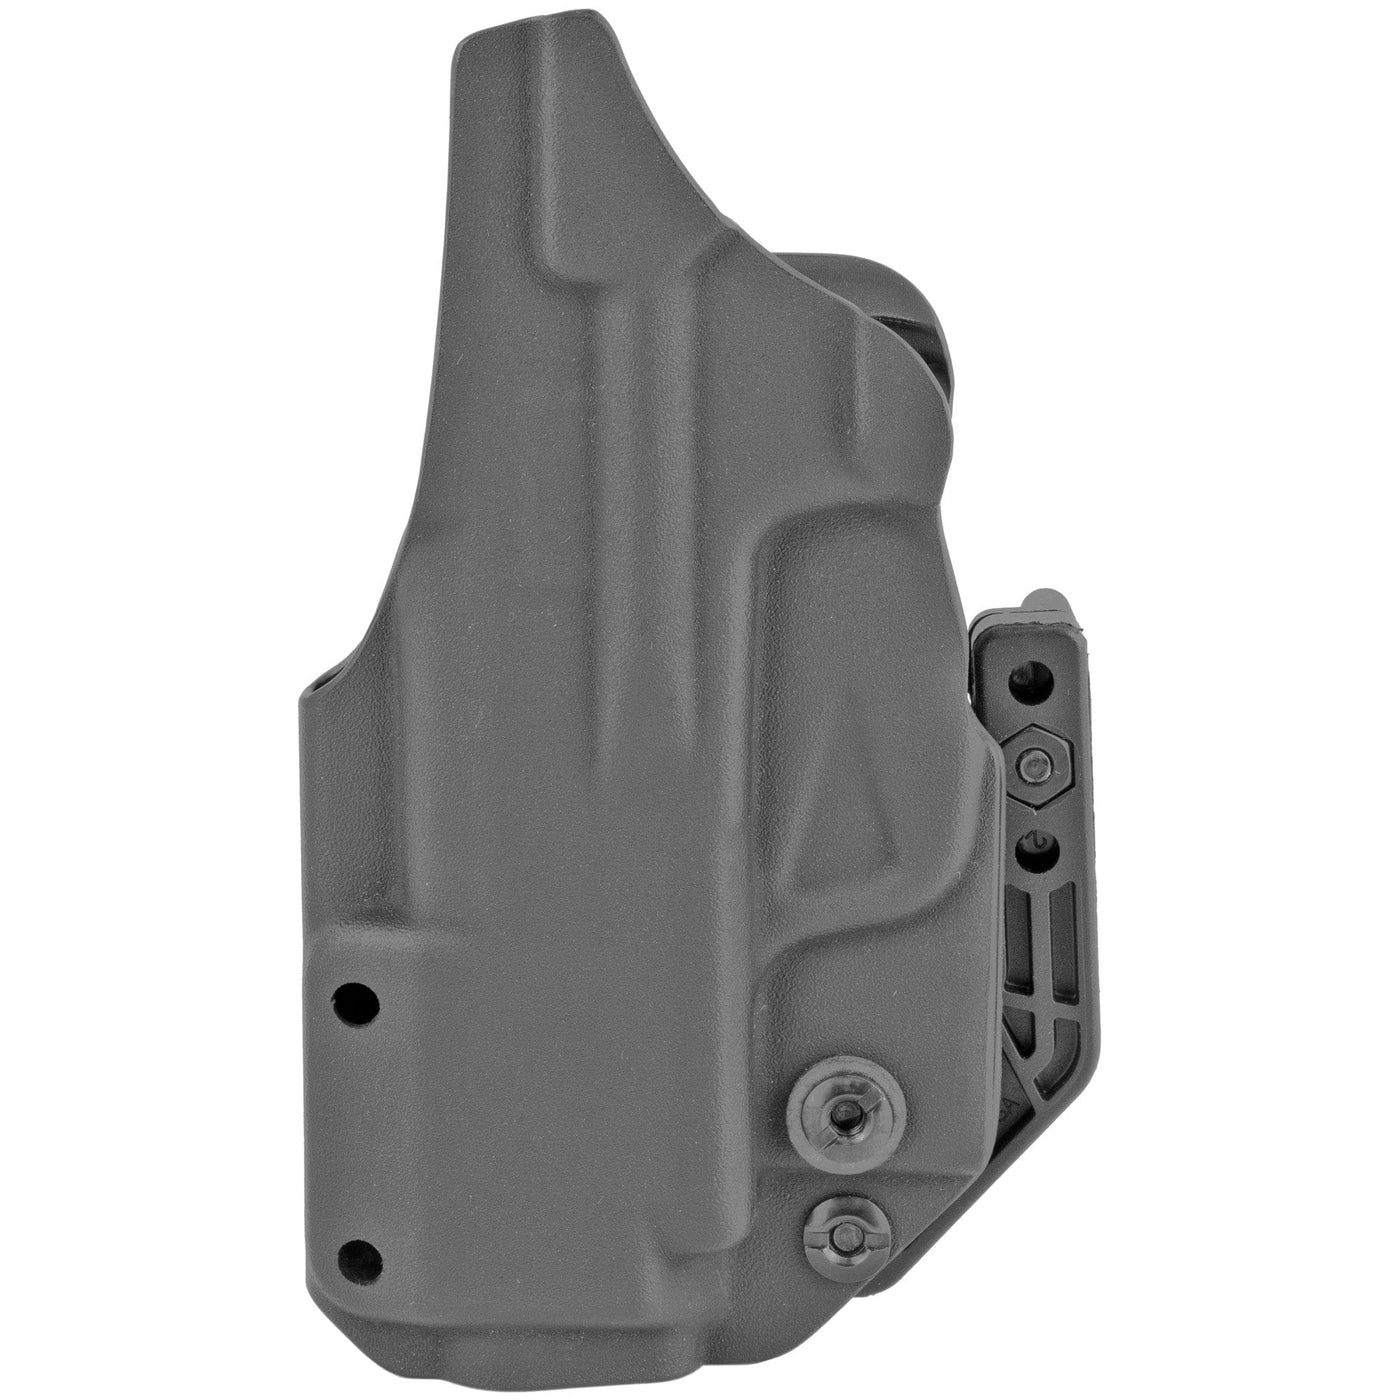 L.A.G. Tactical, Inc. Lag Apd Mk Ii Sig P365 Iwb Blk Rh Holsters